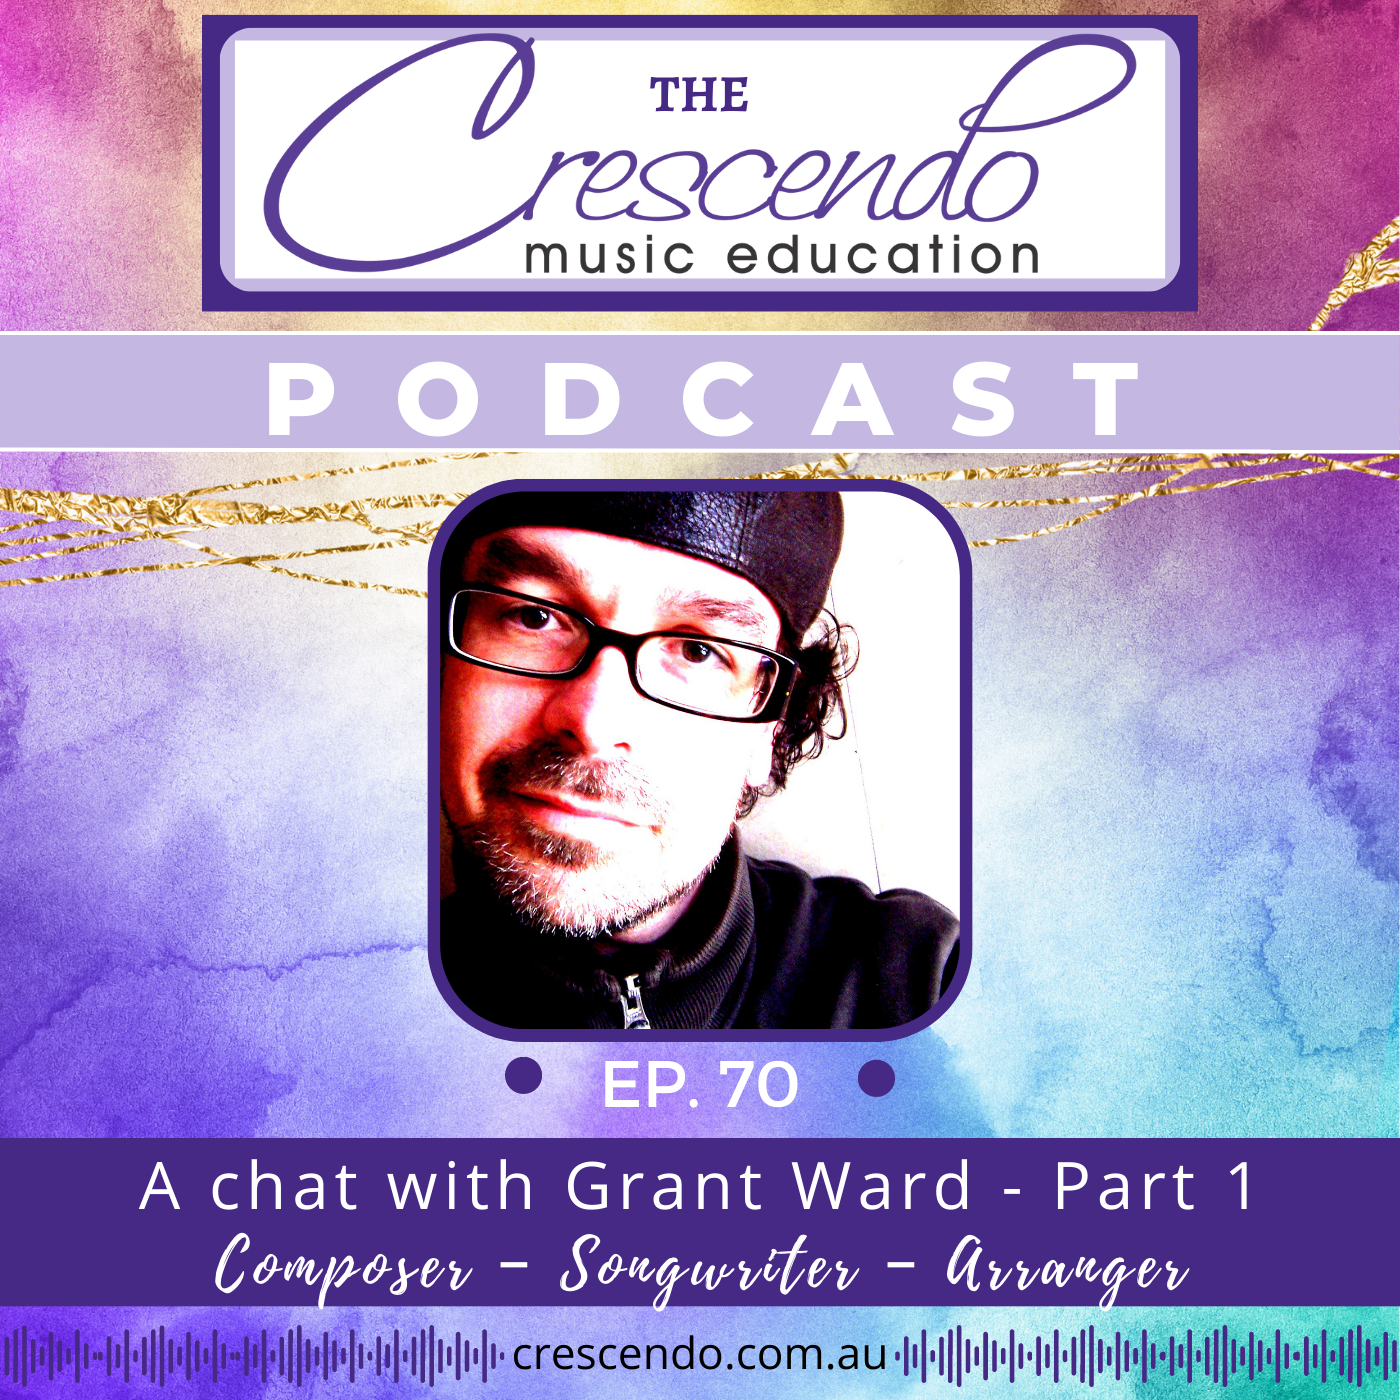 Ladies and gentlemen of the musical realm, let me introduce you to a true musical dynamo – the one and only Grant J Ward!